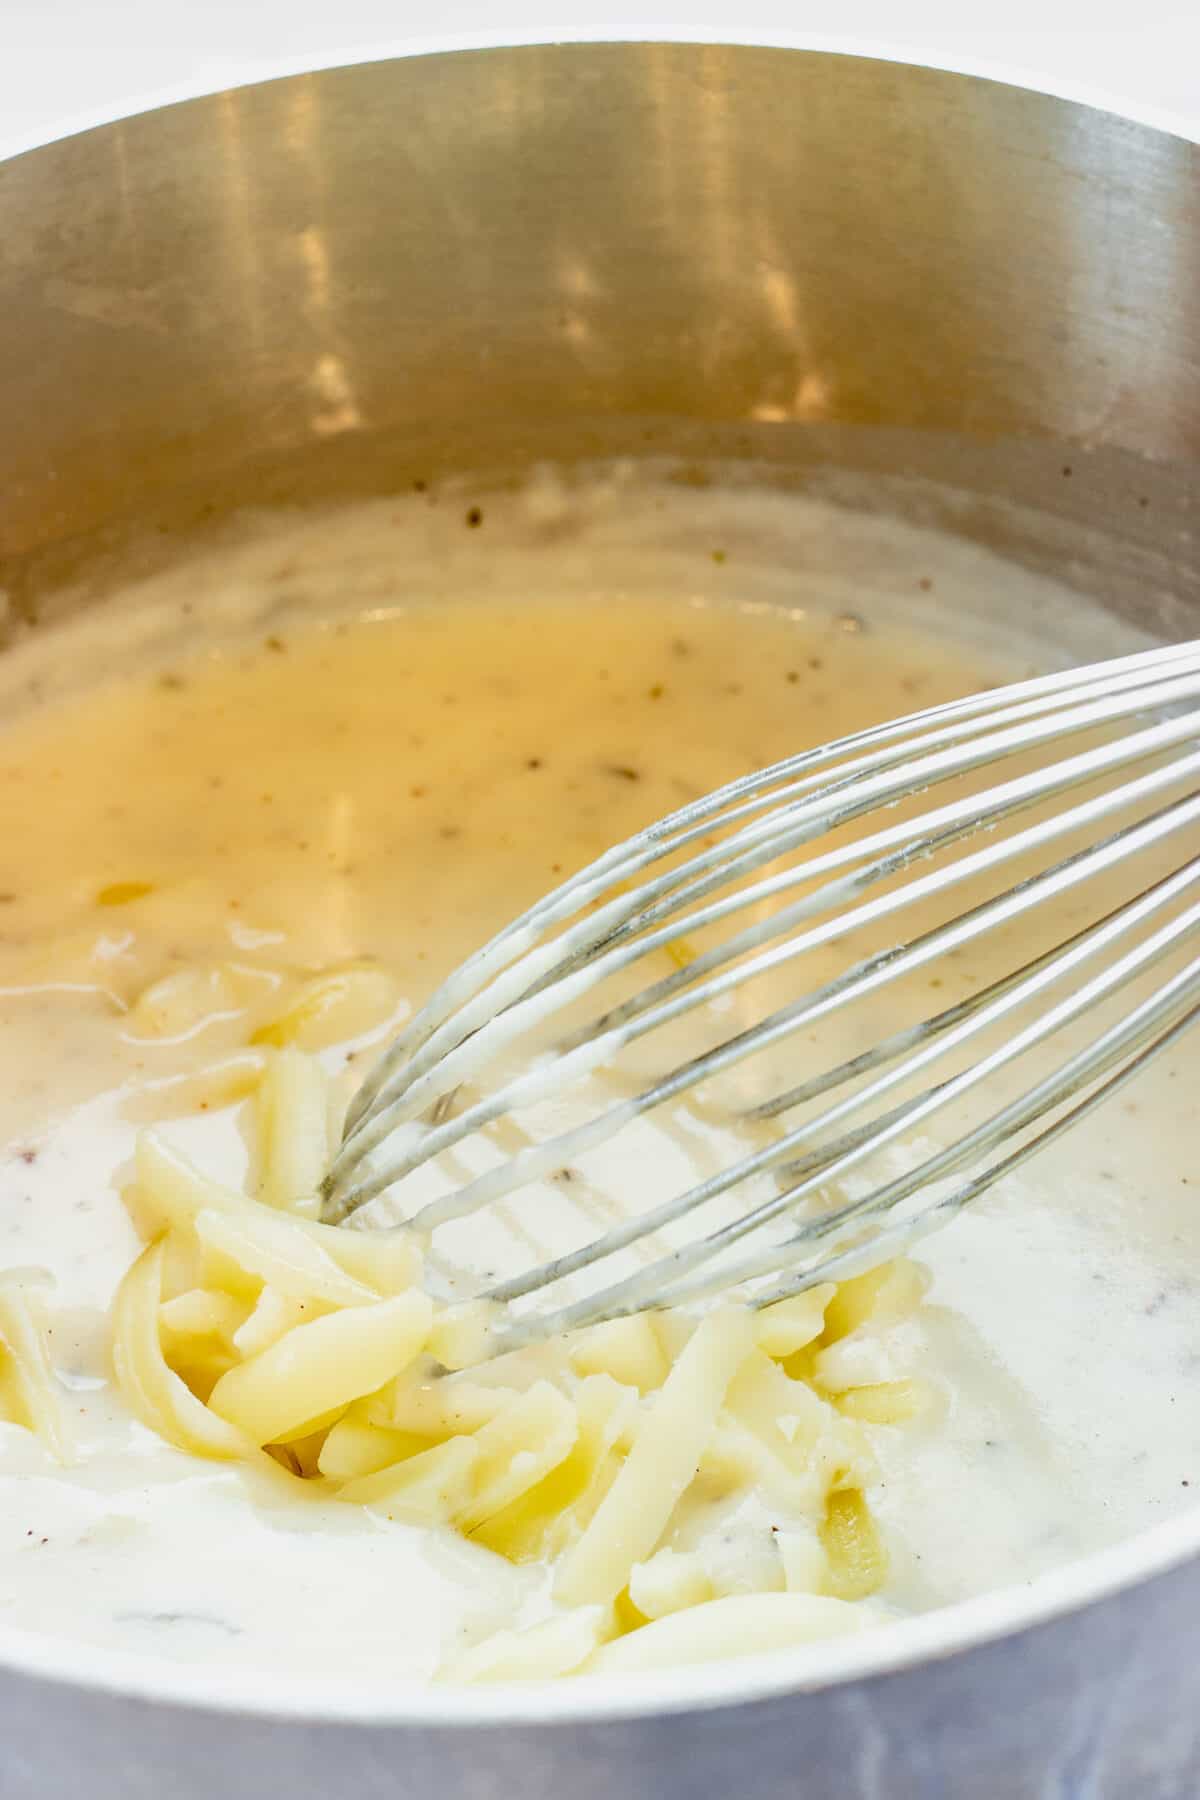 A whisk stirring shredded Gruyere cheese into a pot of Mornay sauce. Step 2 of how to make mixed vegetable casserole.